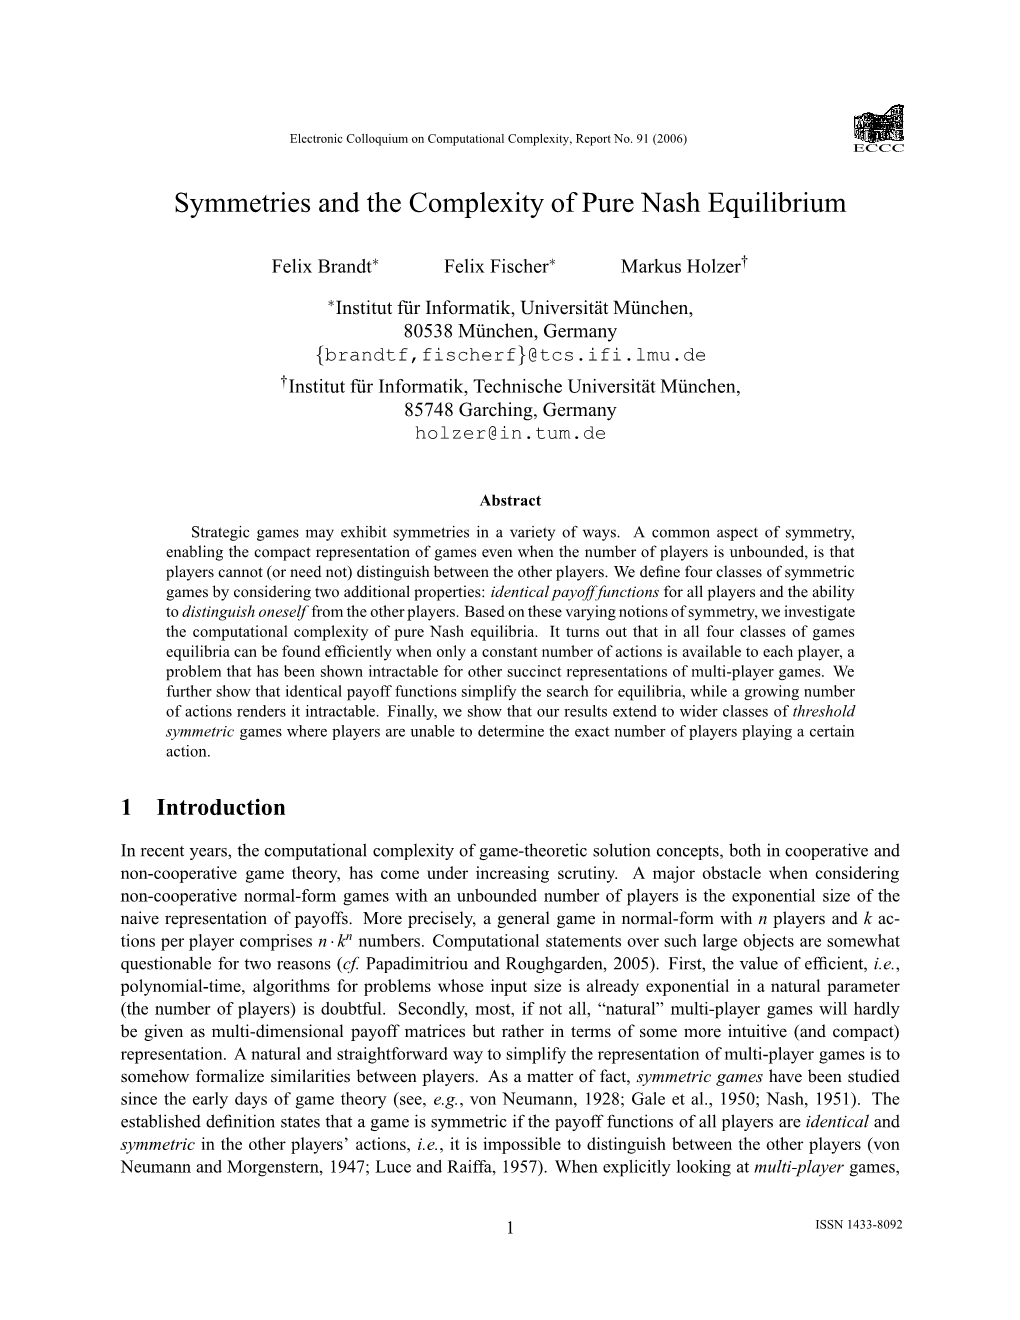 Symmetries and the Complexity of Pure Nash Equilibrium